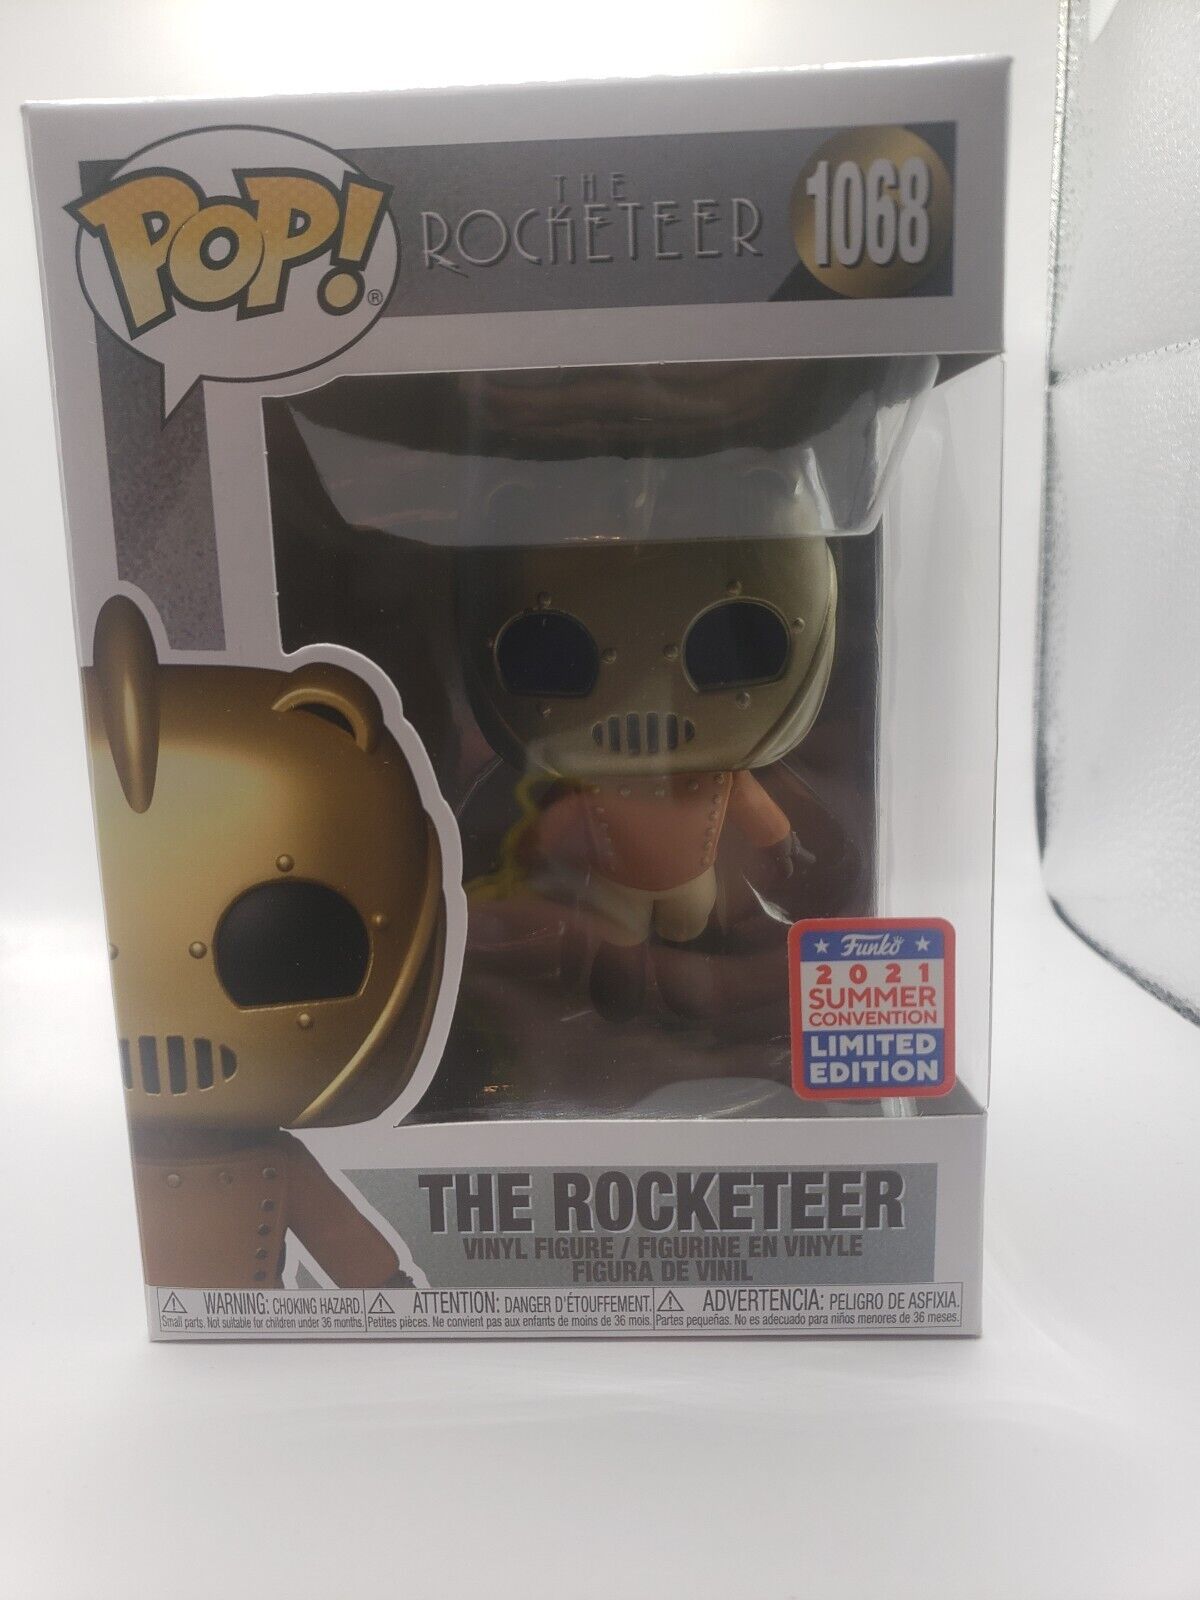 The Rocketeer #1068 Summer Convention 2021 Limited Edition  \